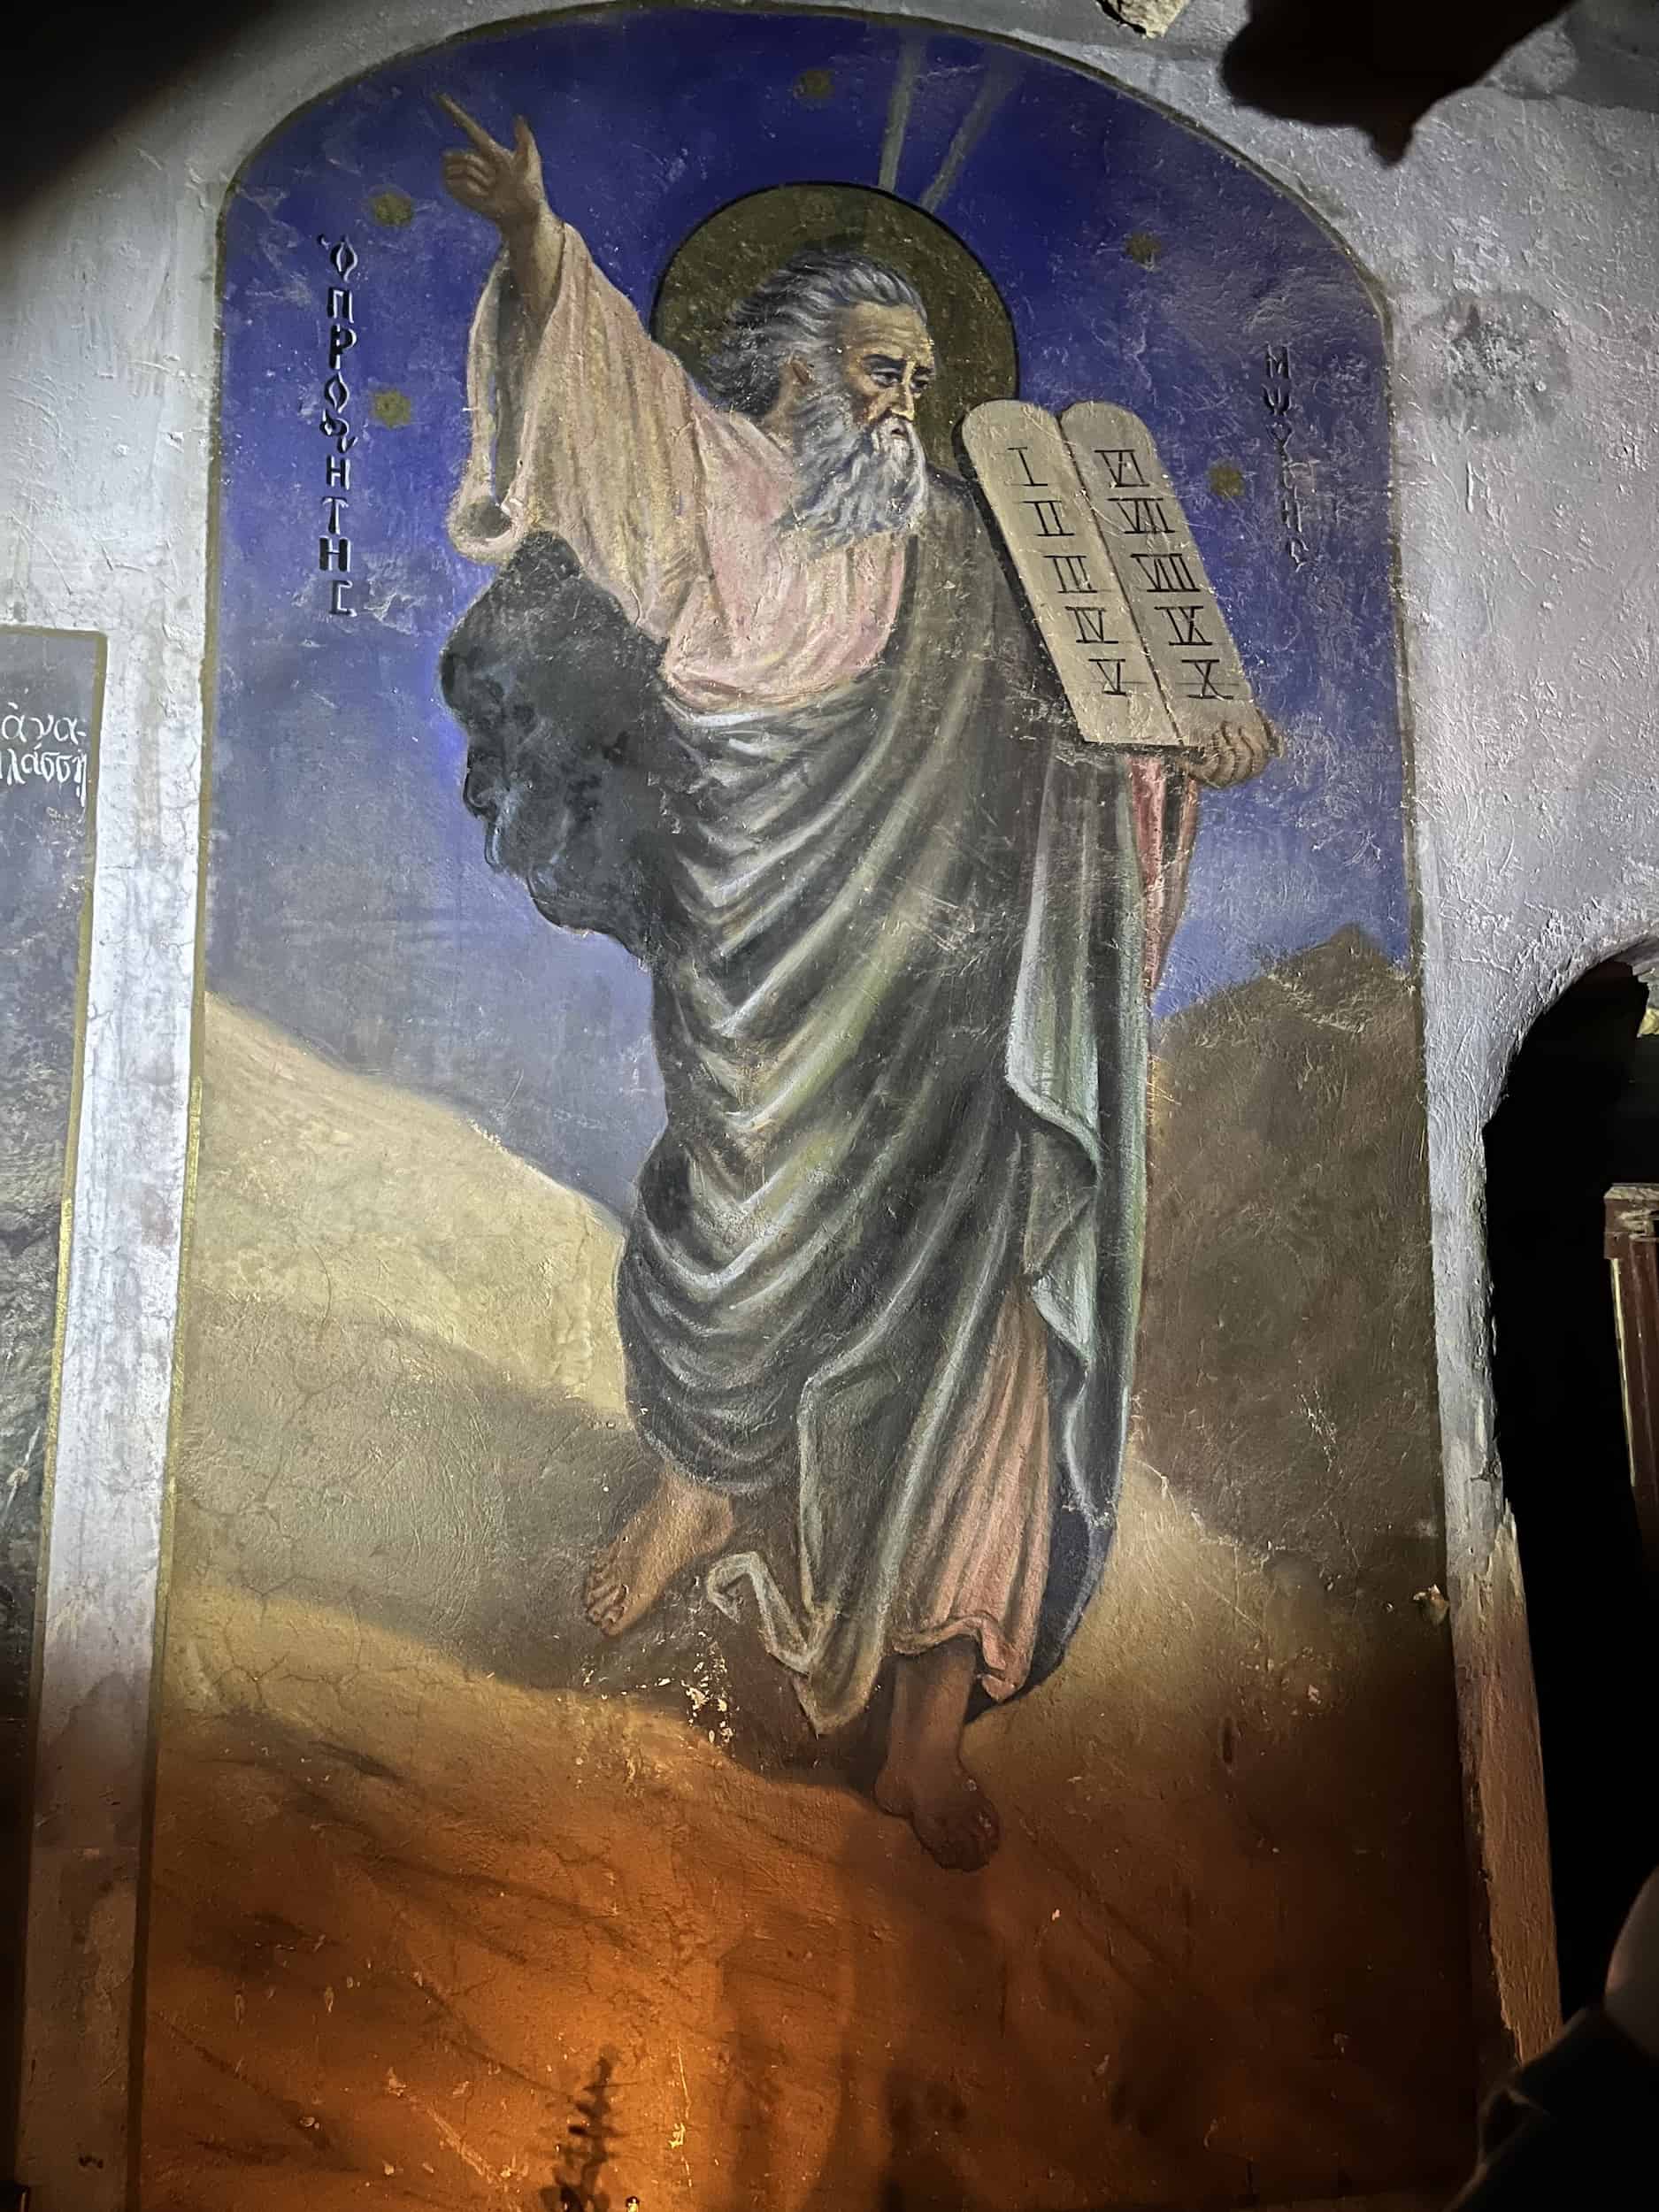 Moses with the Ten Commandments in the Church of the Holy Trinity on Mount Sinai in Egypt